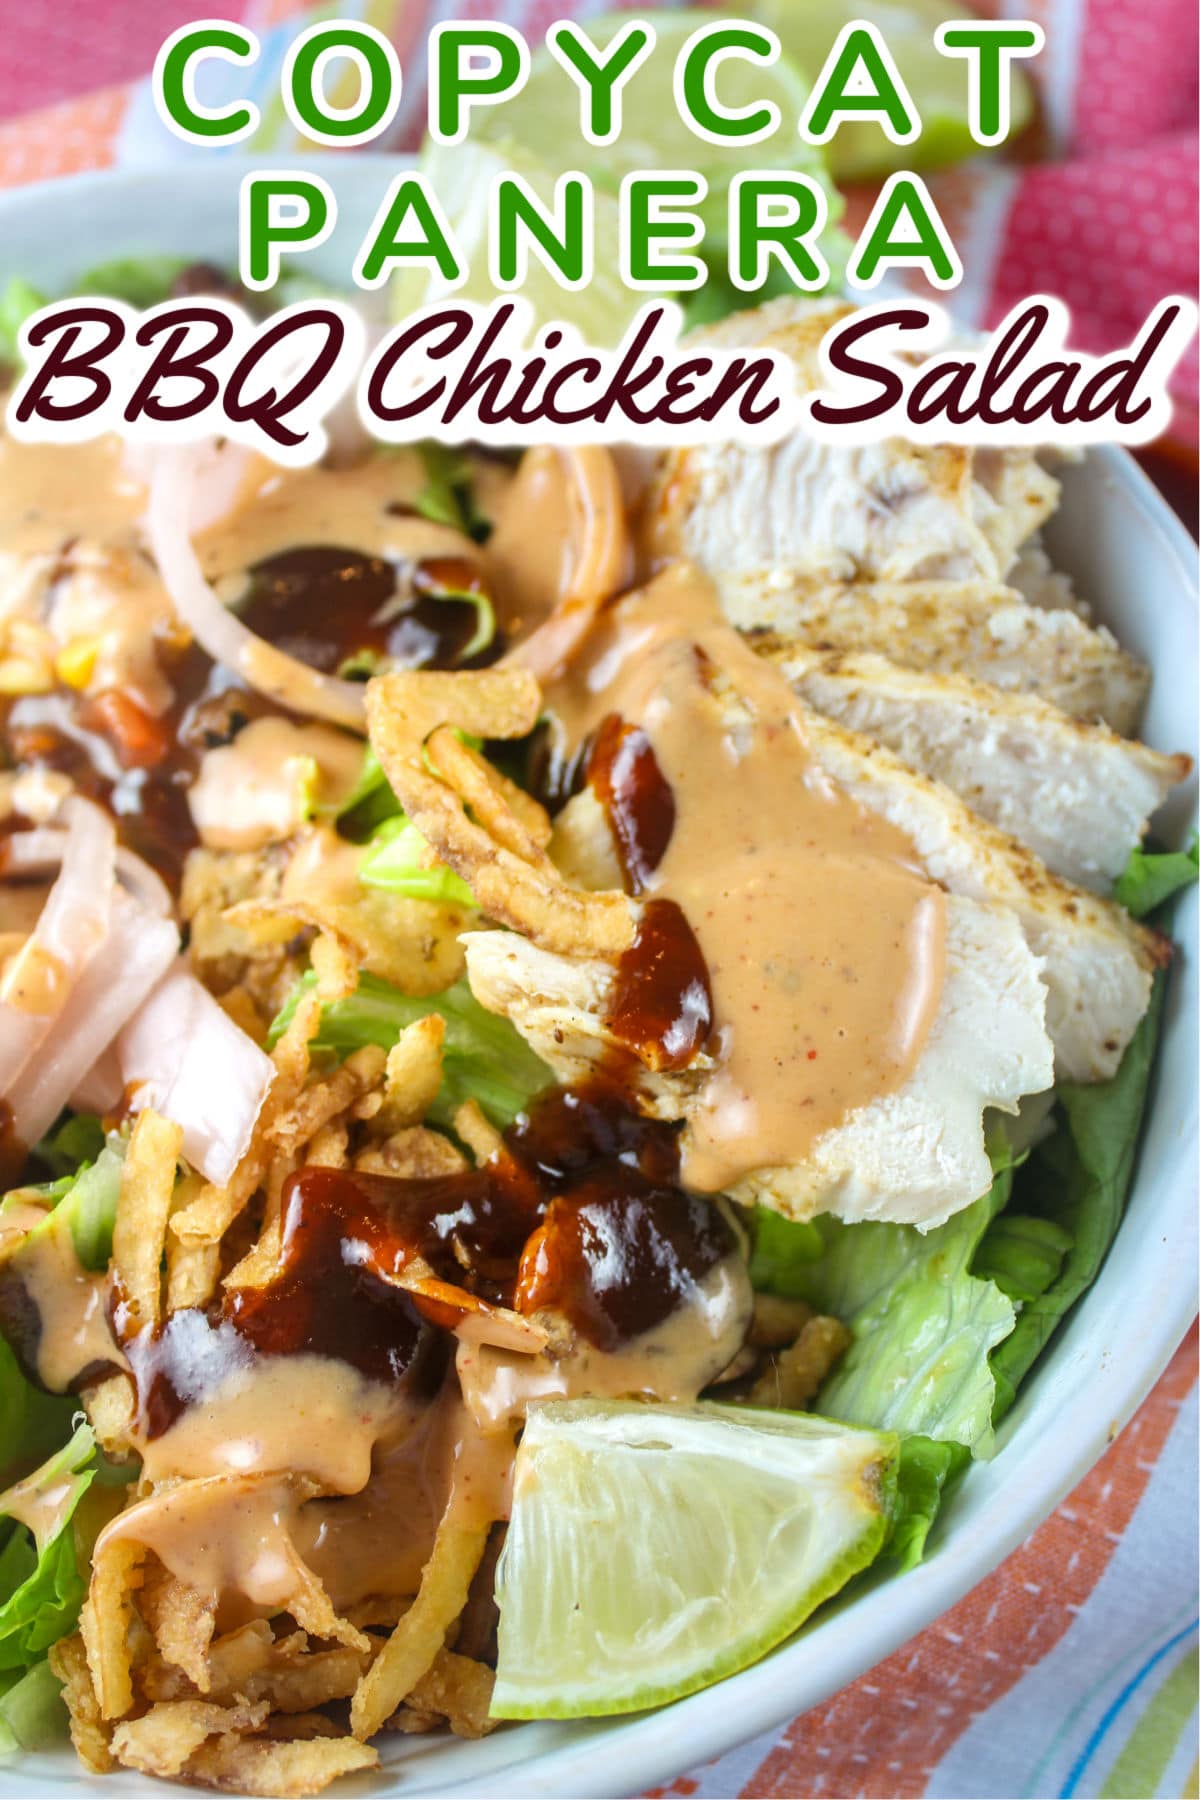 This Copycat Panera Bread BBQ Chicken Salad is brand new and so delicious - you'll have to make it for lunch and dinner! via @foodhussy